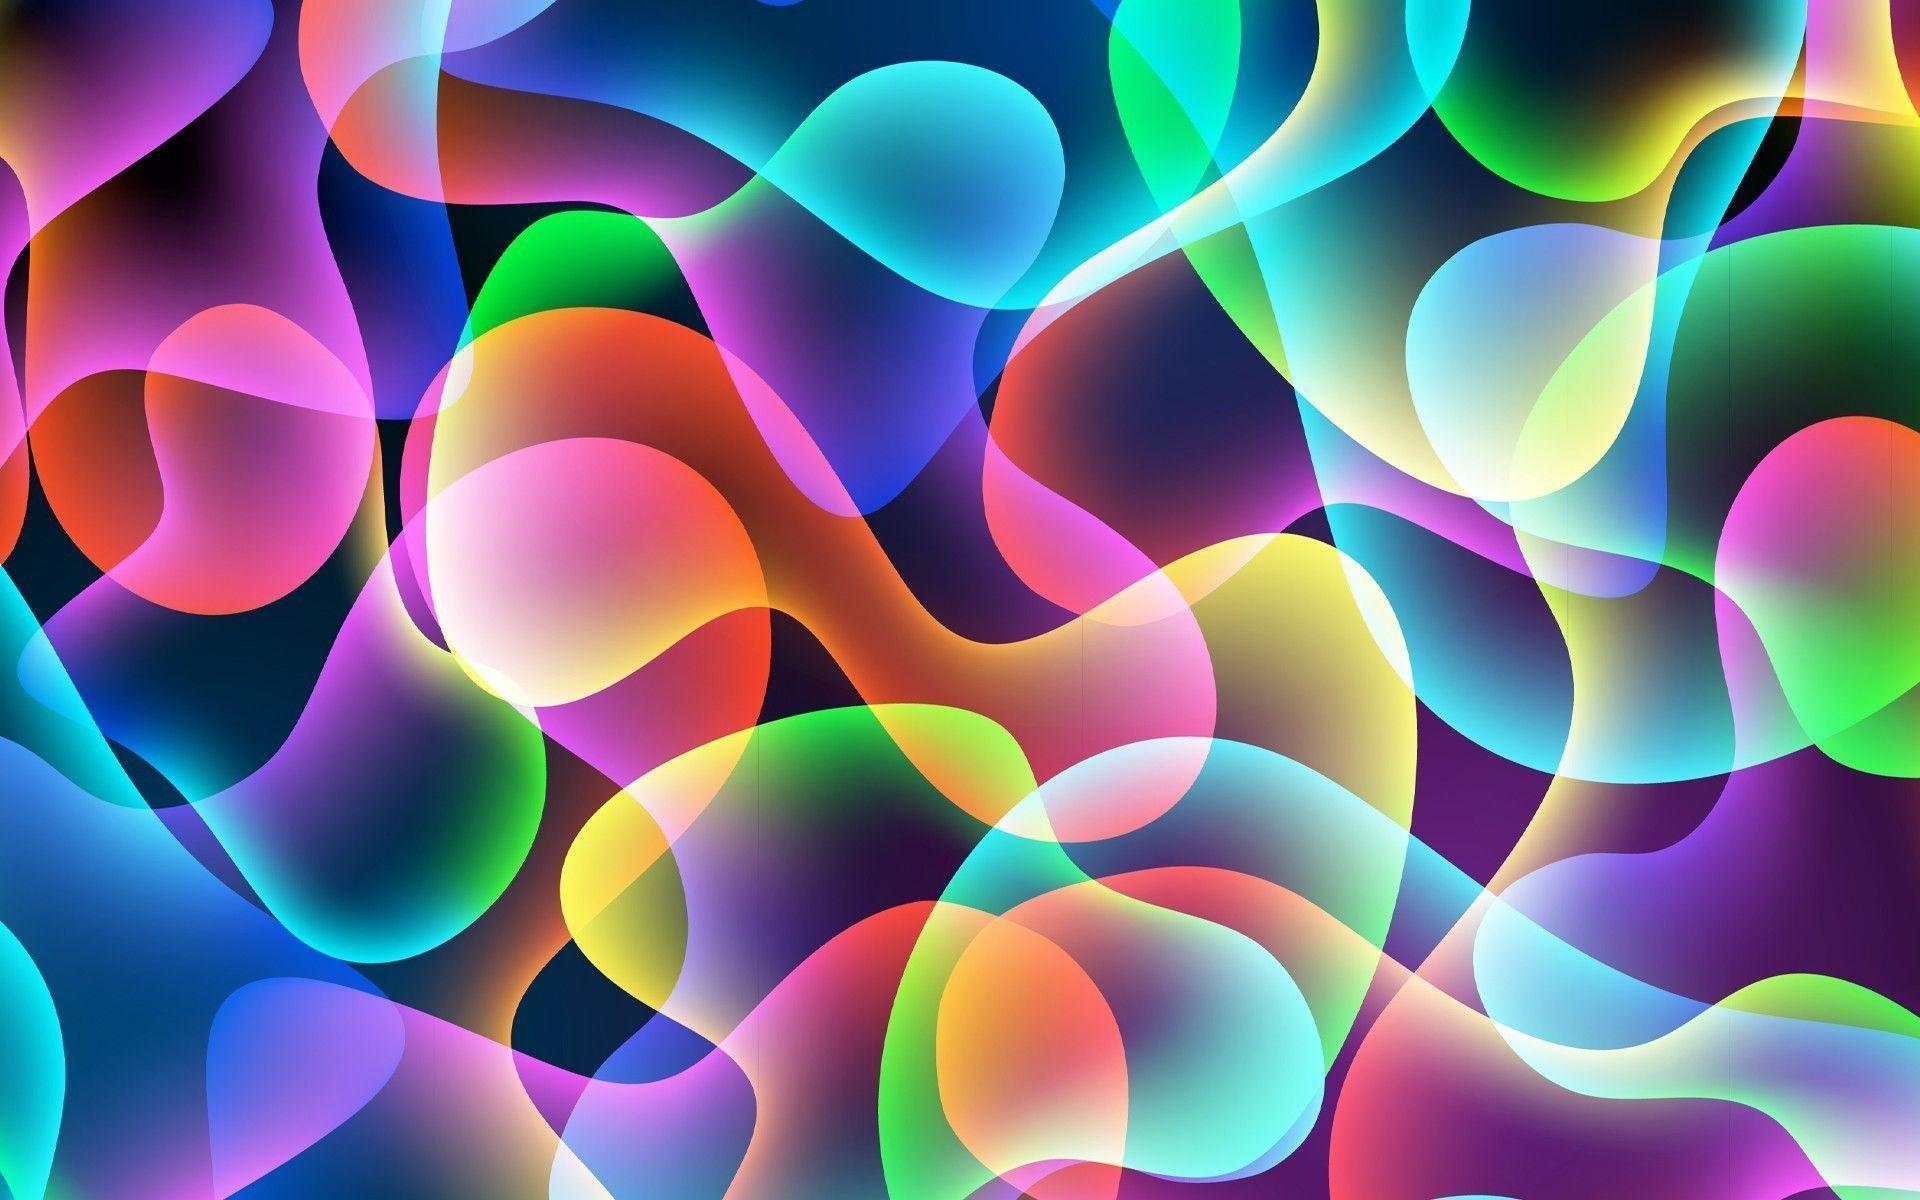 Cool Abstract Background Wallpaper (6311) ilikewalls